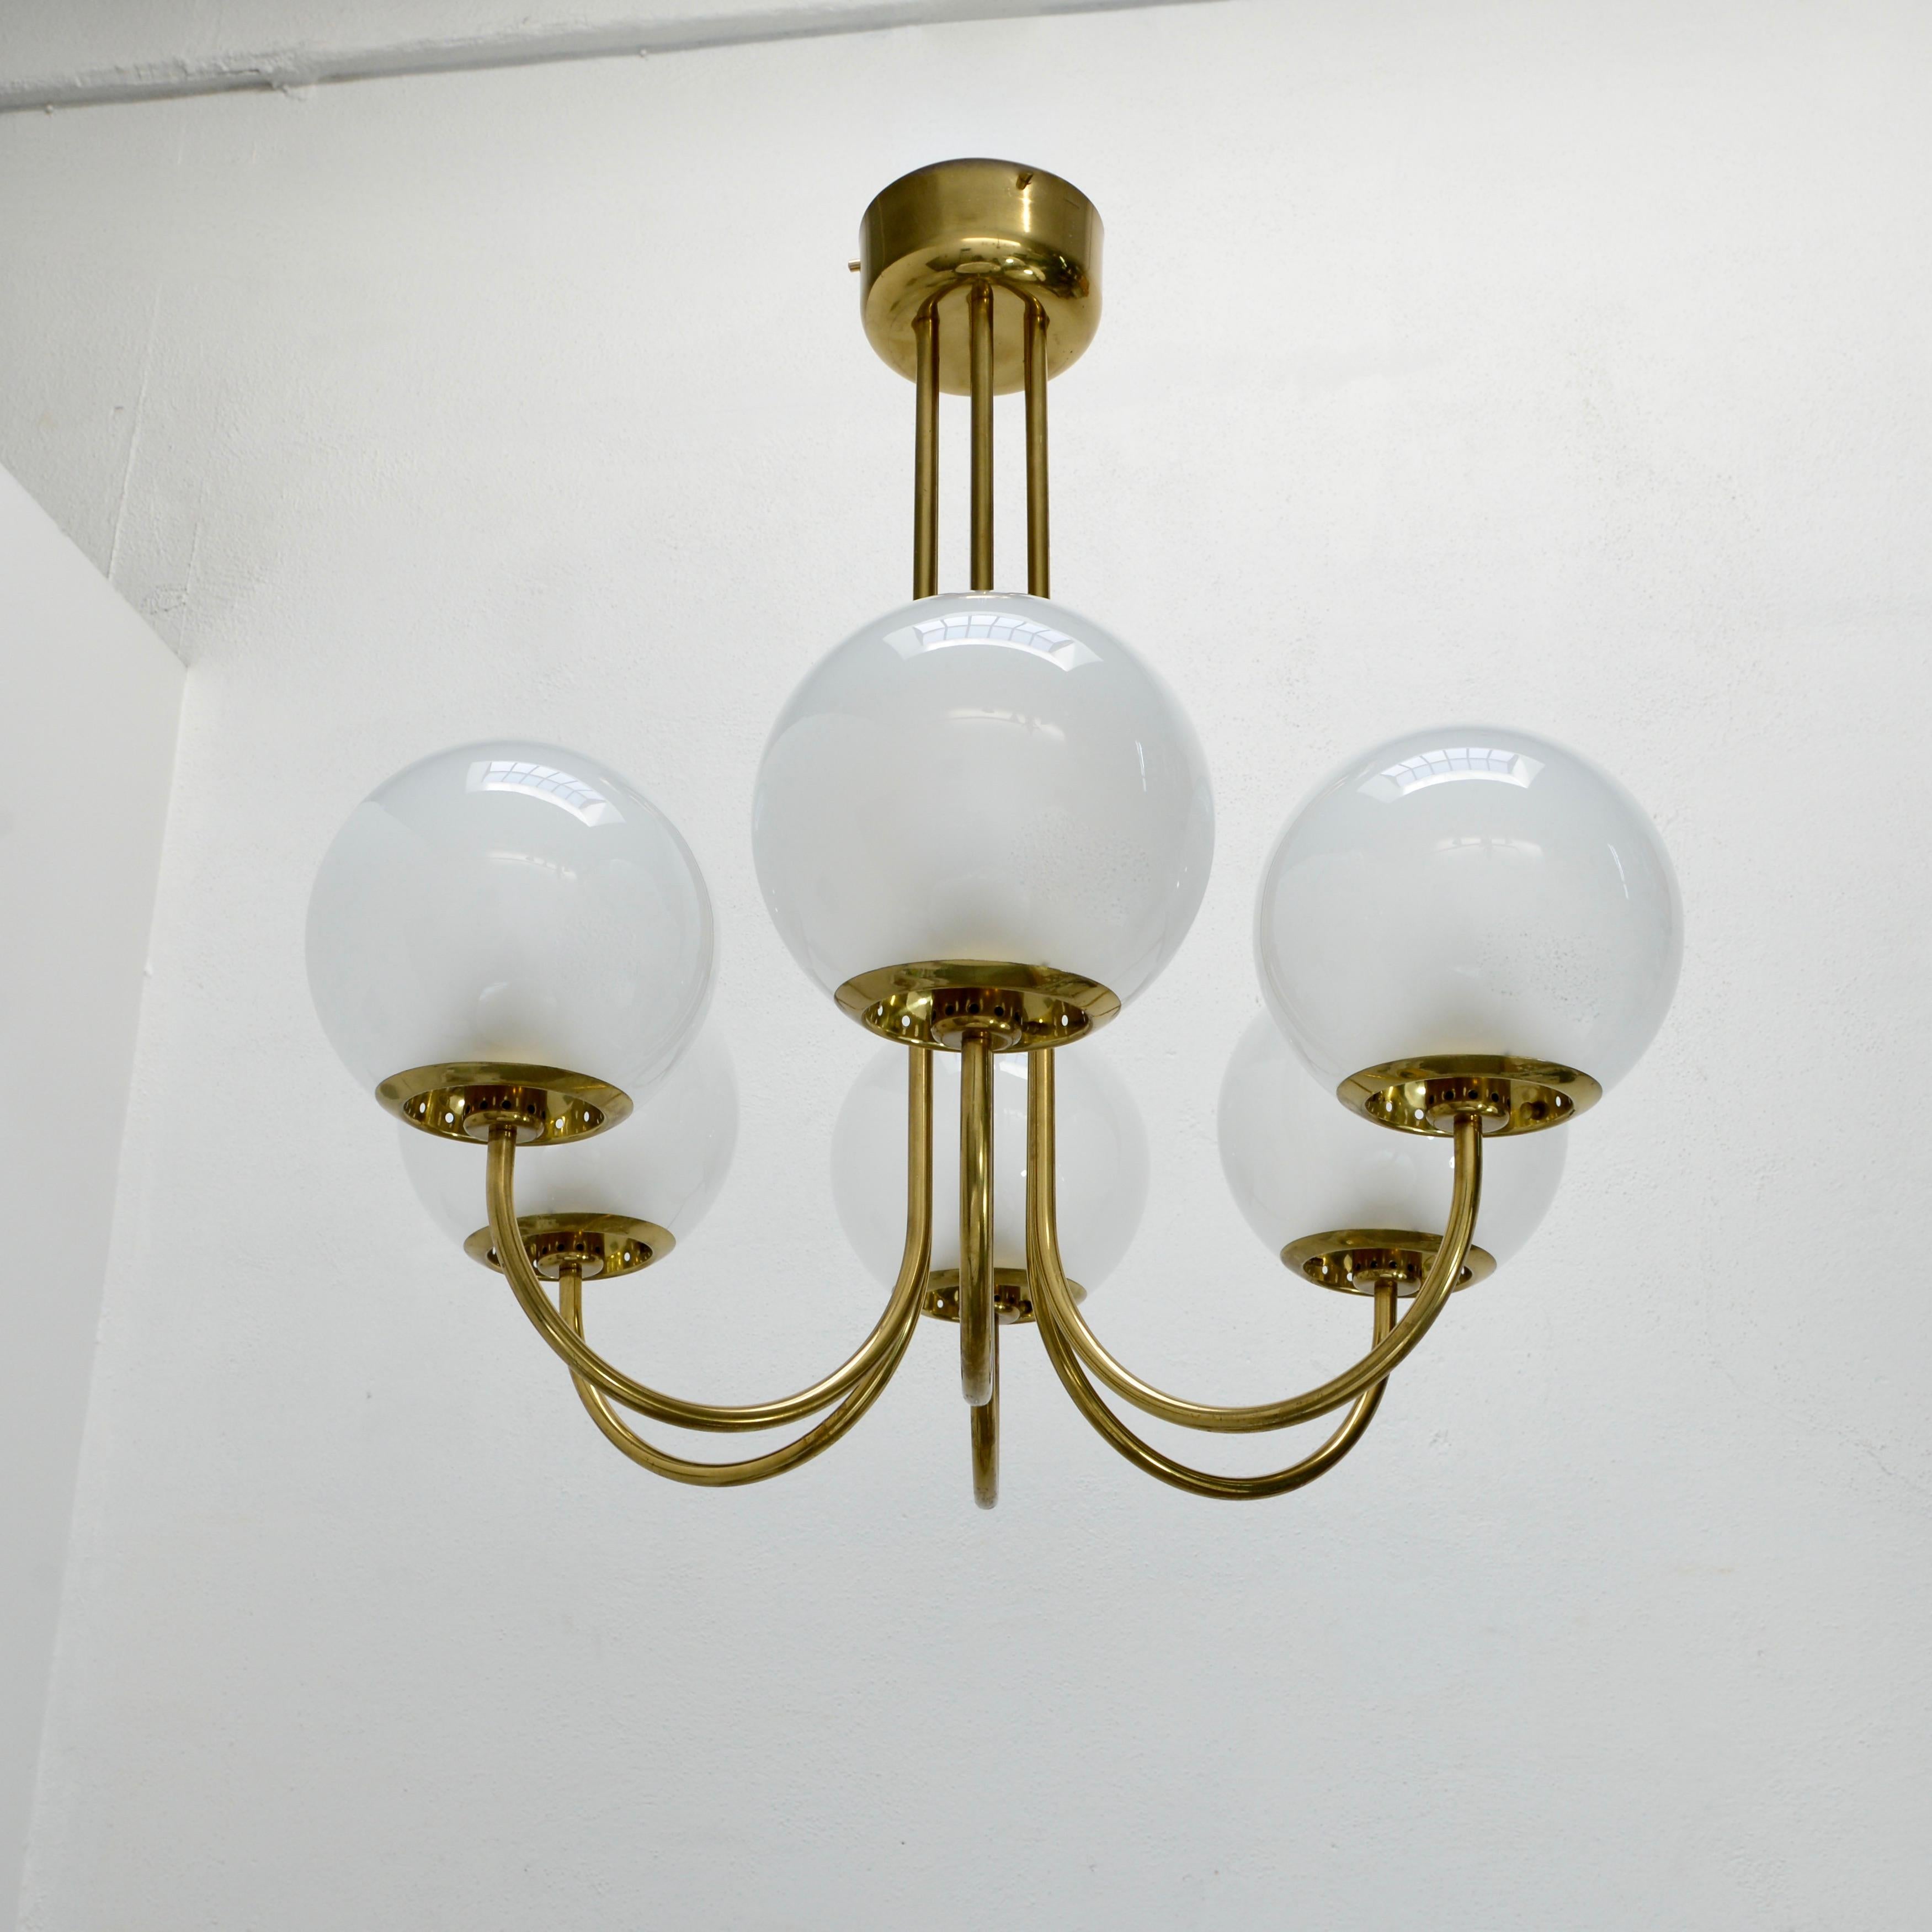 Stunning (6) globe midcentury 1960s Italian glass, and naturally aged brass chandelier by Lamperti. With 6-E26 medium based sockets (1) per shade. Wired for use in the US. Light bulbs included with order.
Measurements:
OAD/FH 36.5”
Diameter